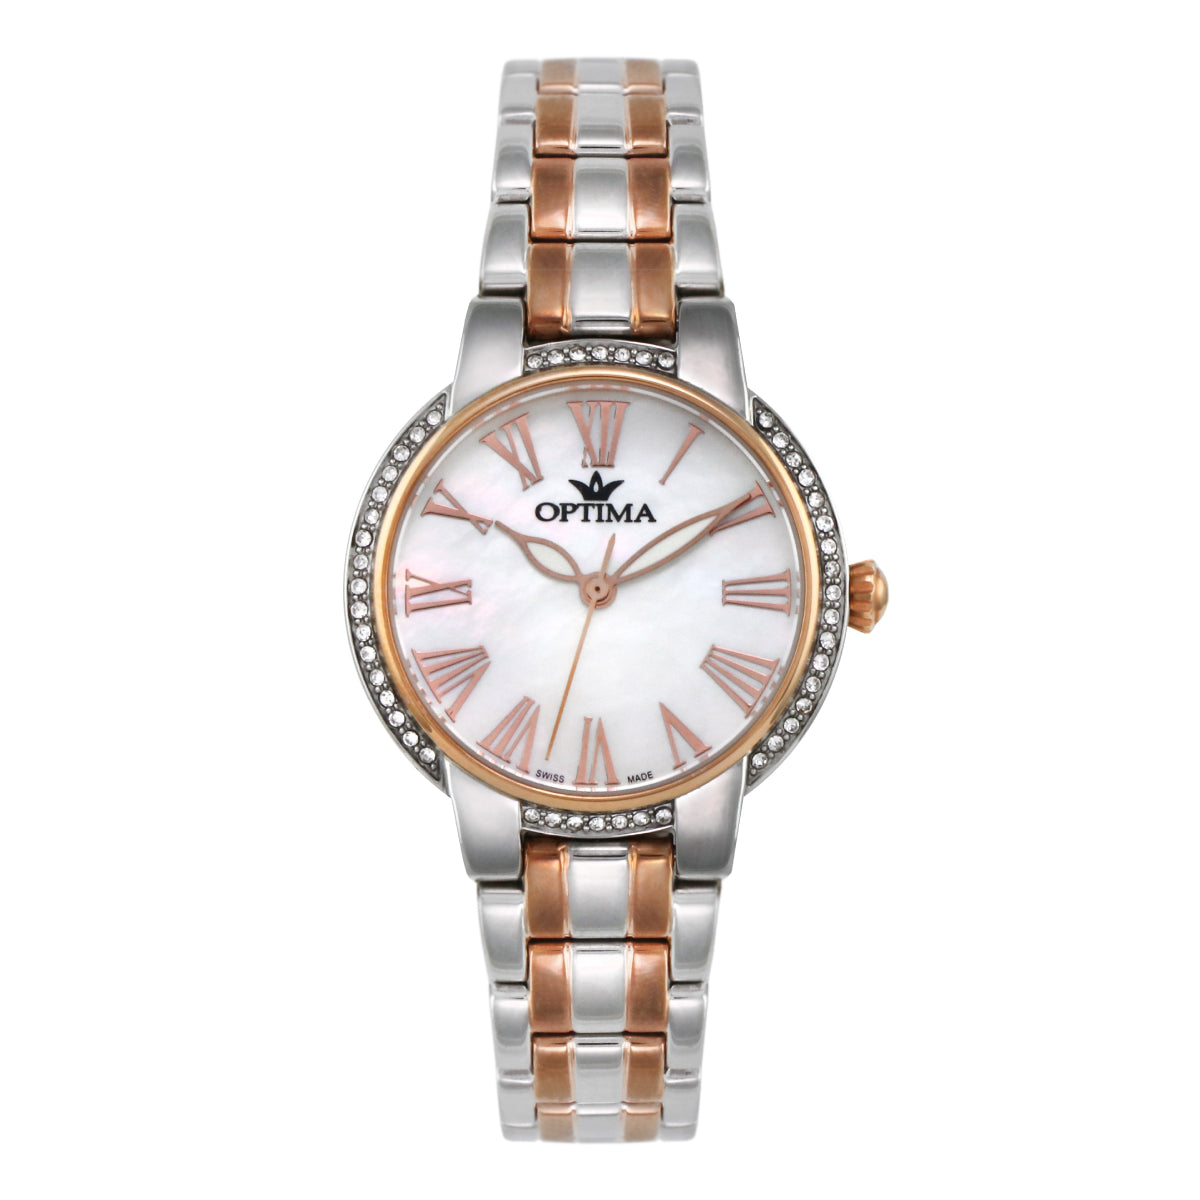 Optima Women's Swiss Quartz Watch with Pearly White Dial - OPT-0027